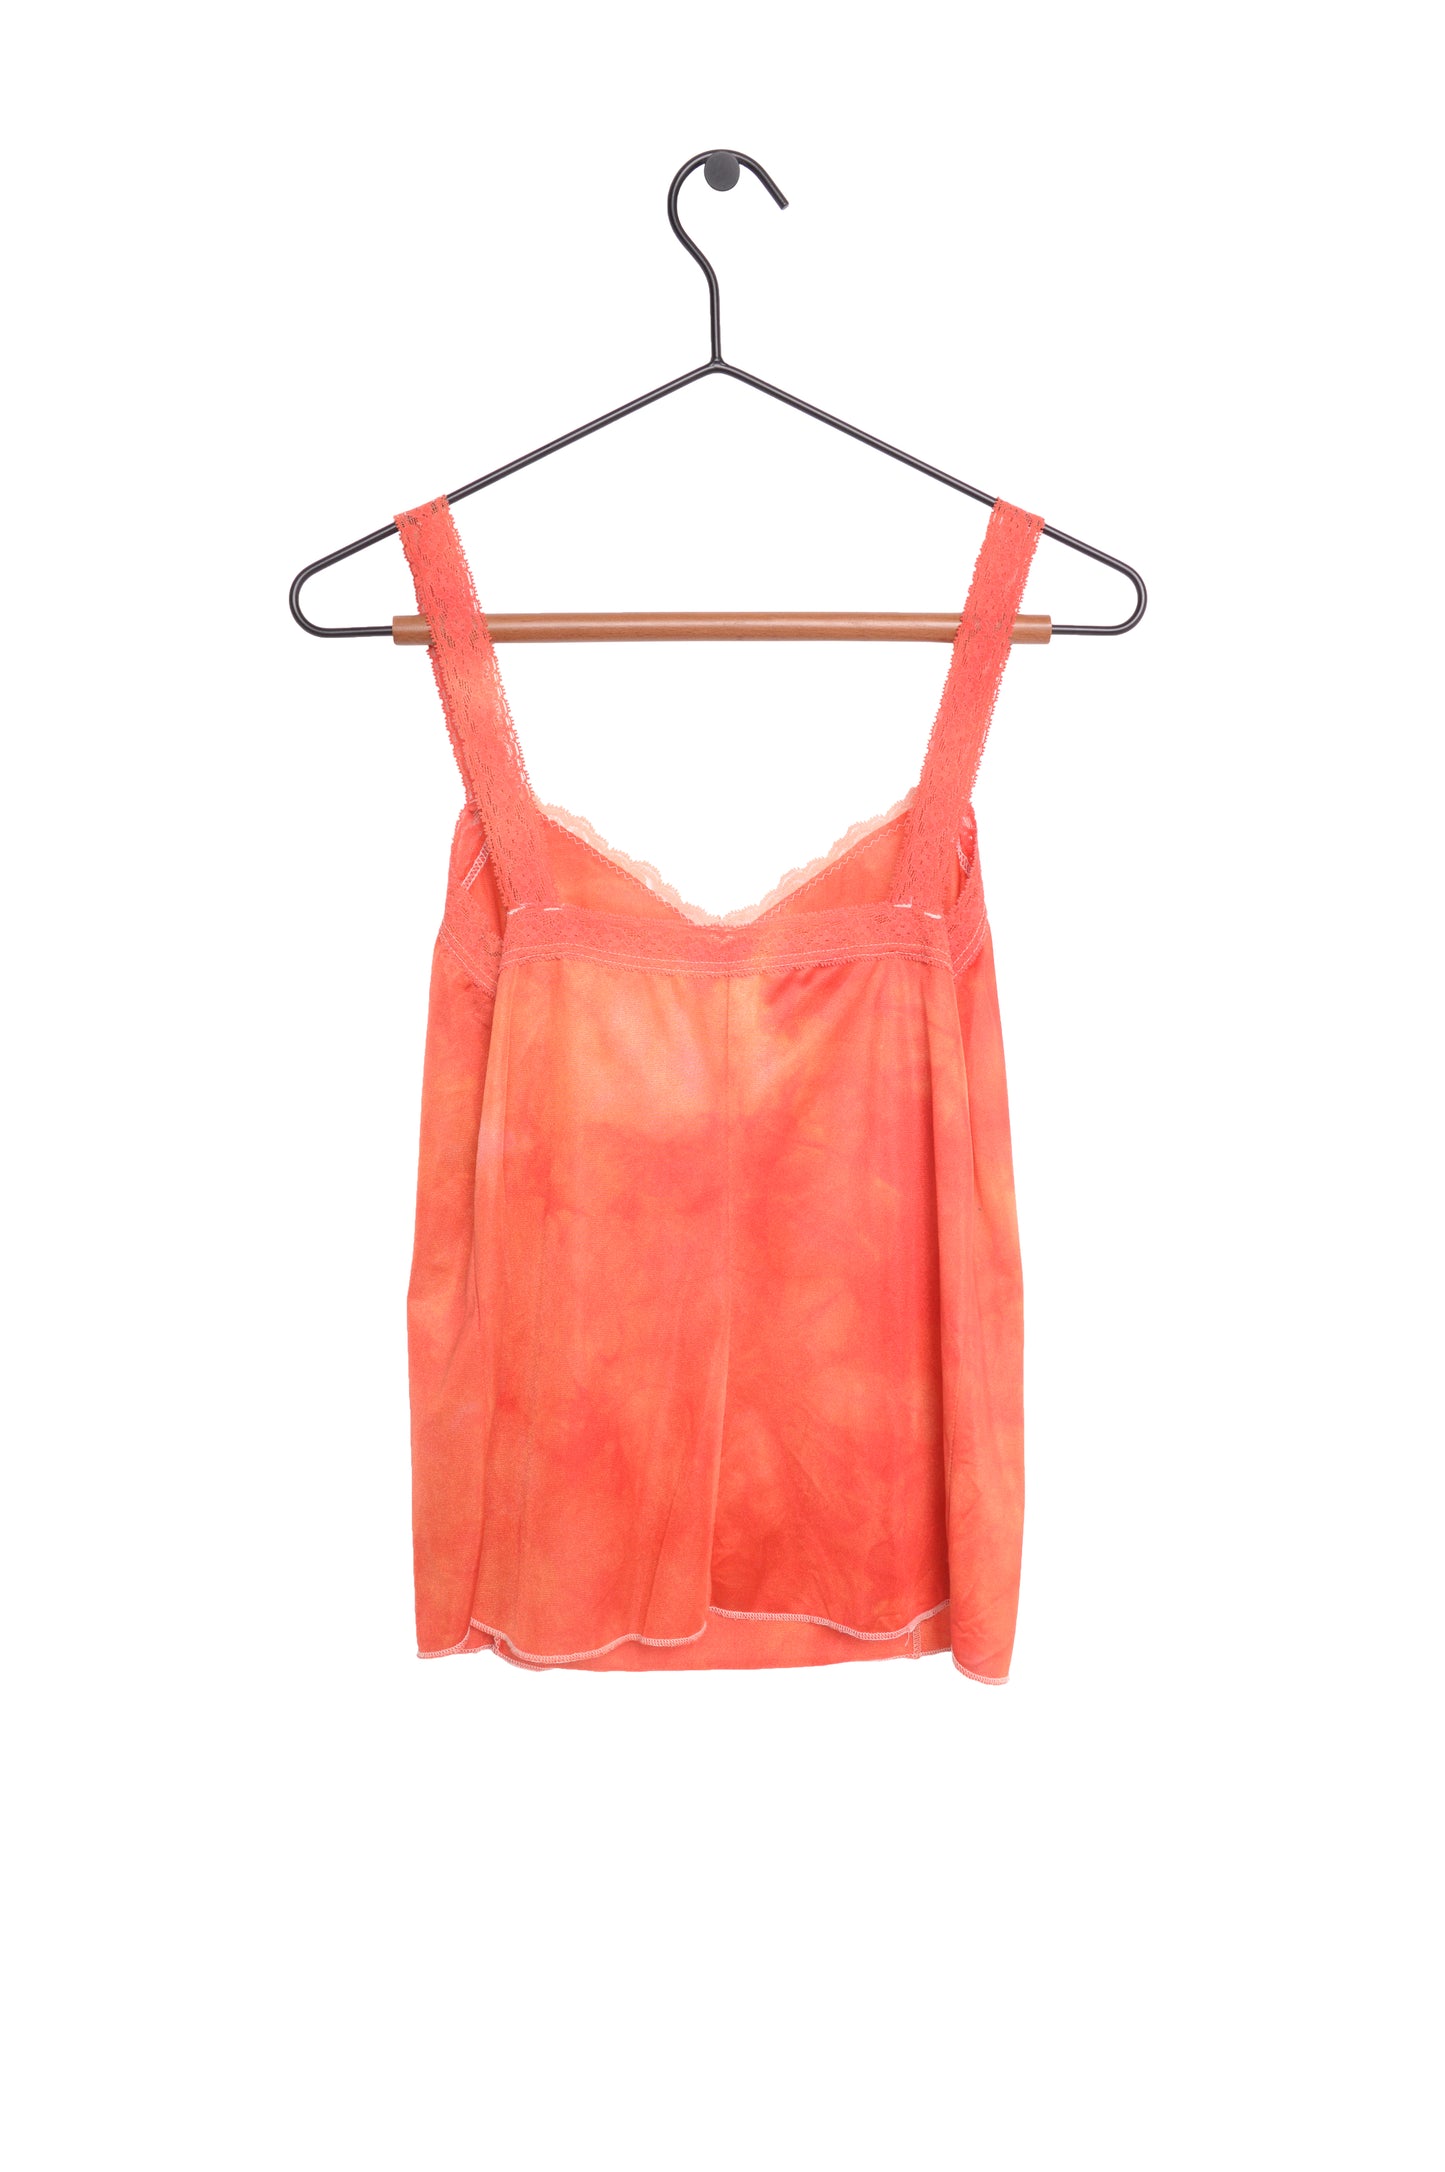 1950s Hand-Dyed Slip Top USA